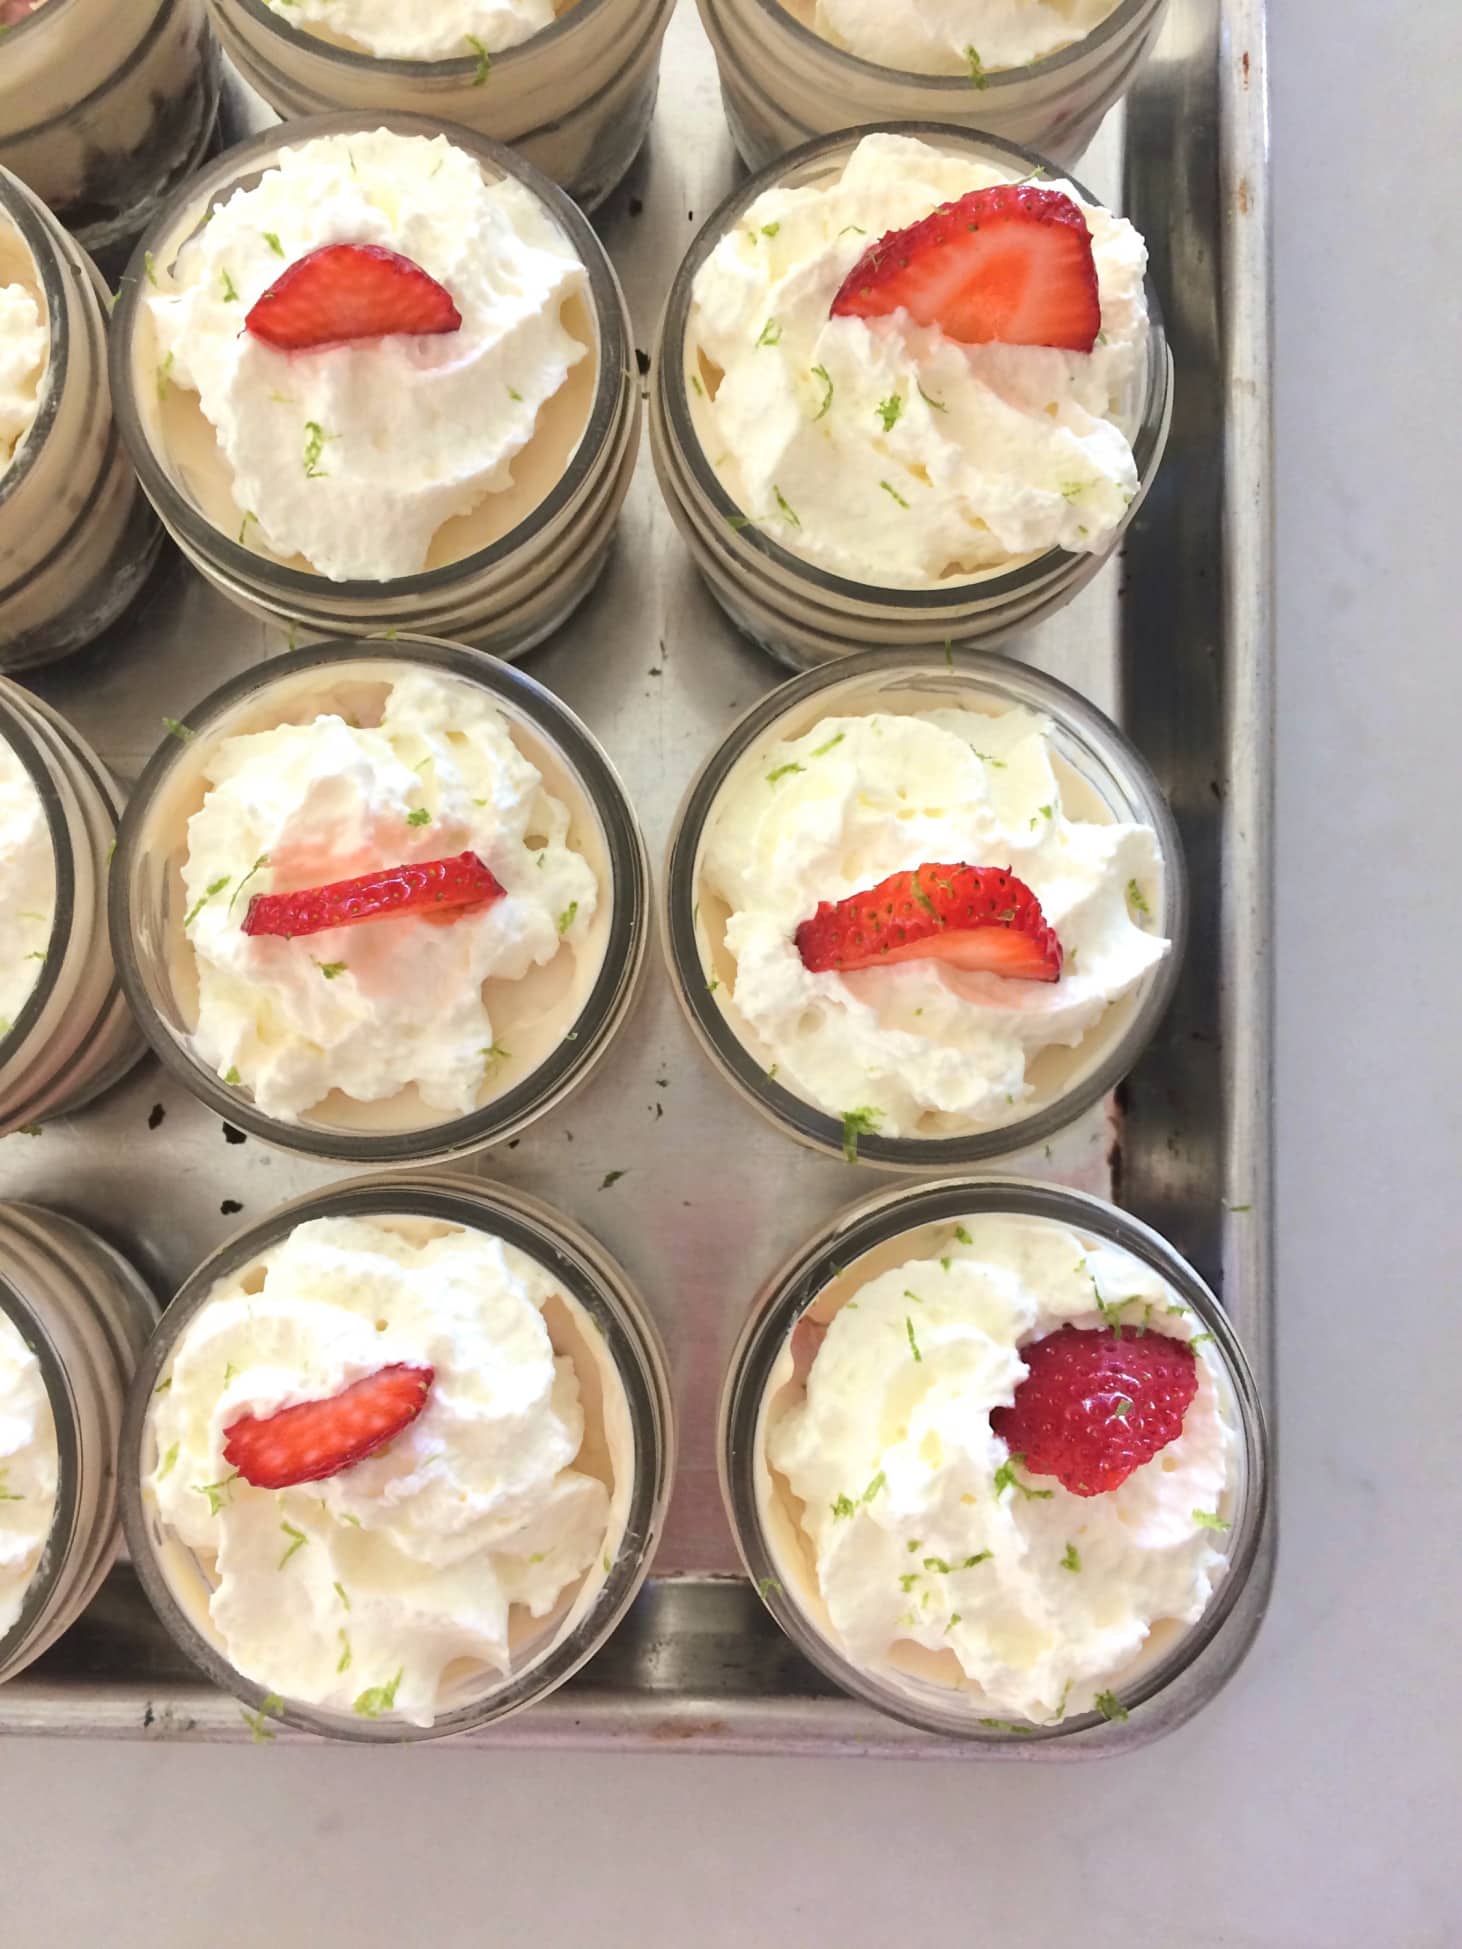 Strawberries & Cream Cheesecakes in a Jar